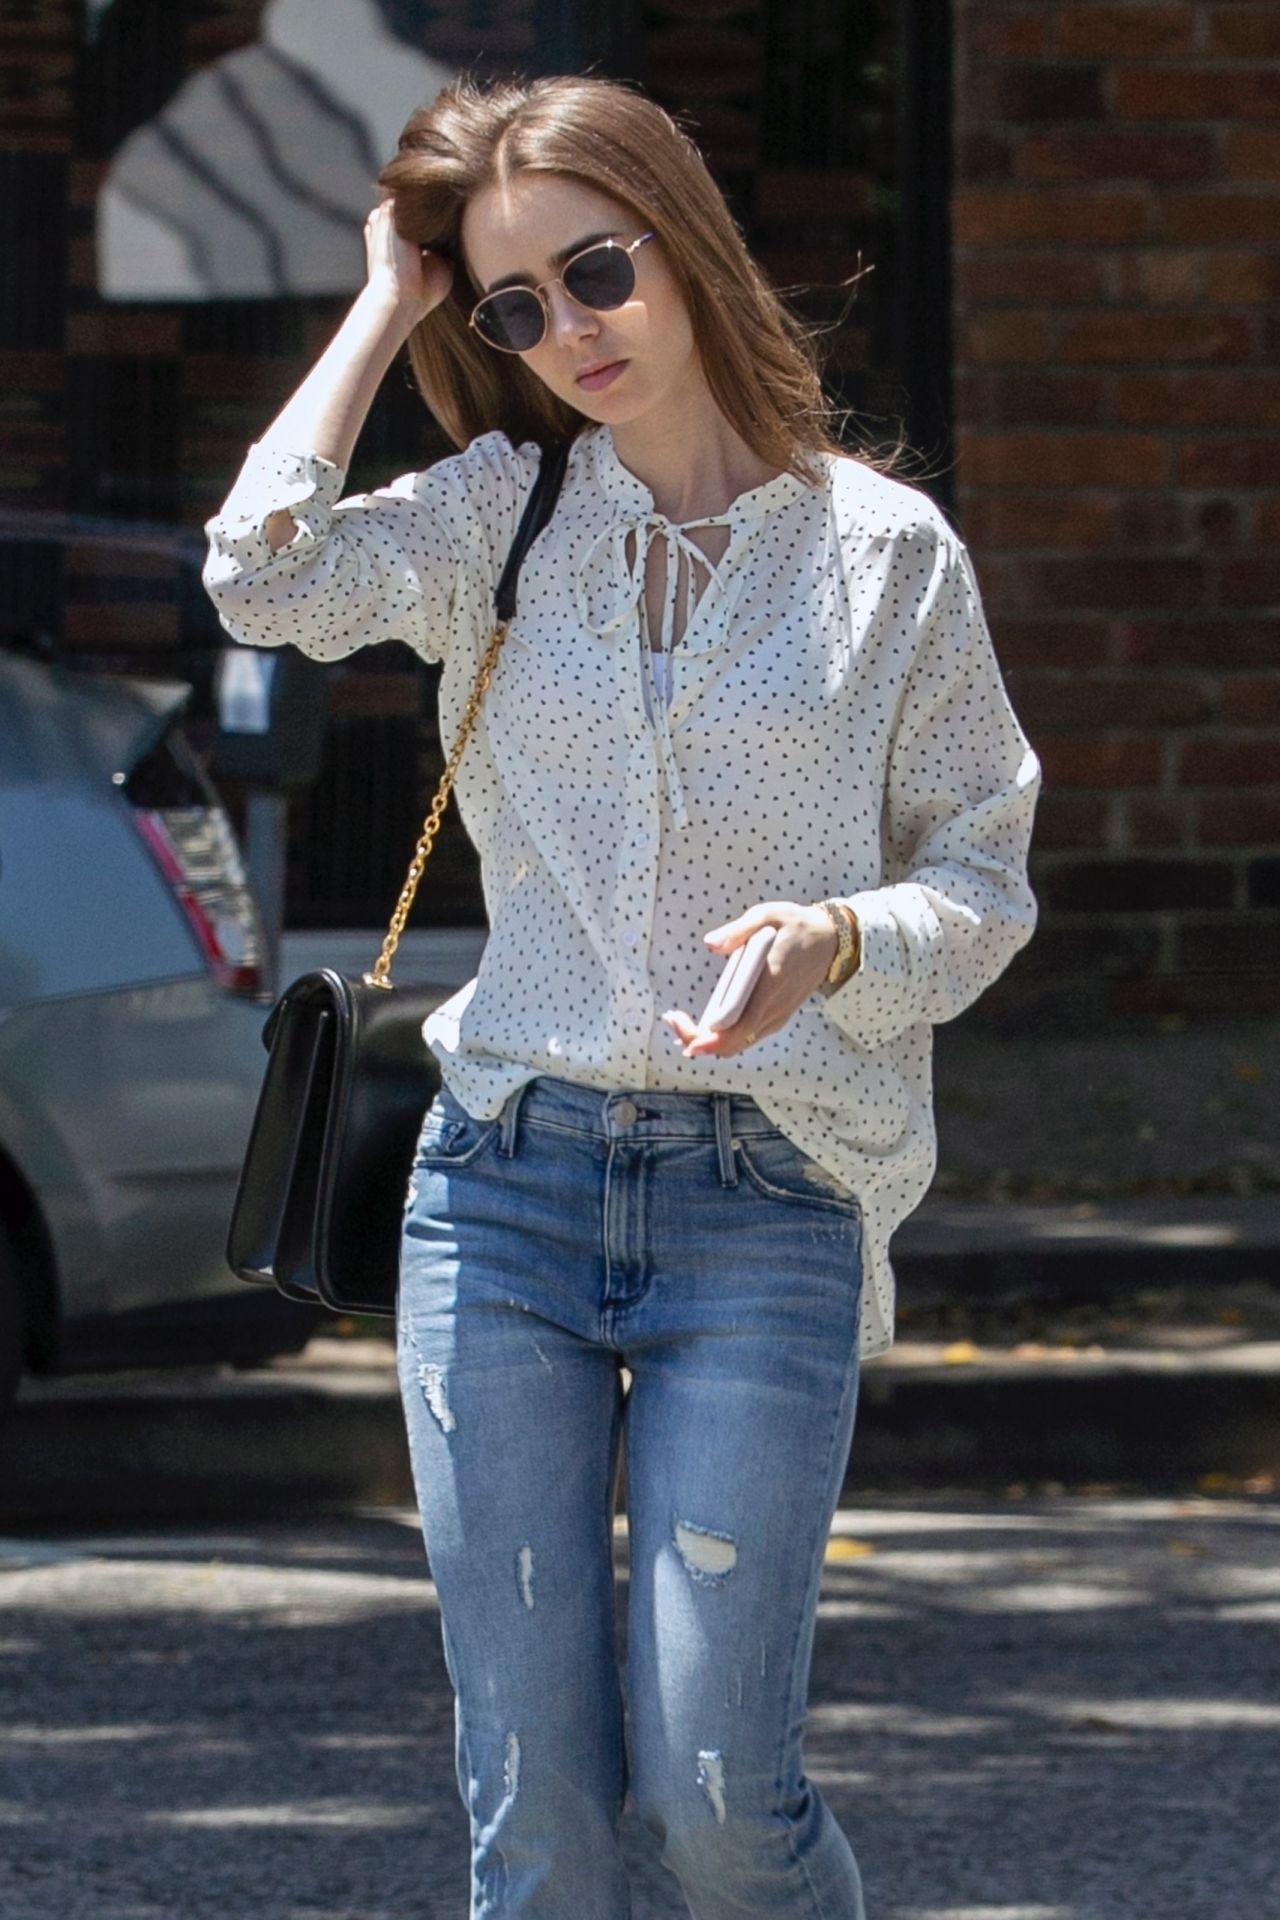 lily-collins-at-il-piccolino-in-west-hollywood-05-29-2019-4.jpg